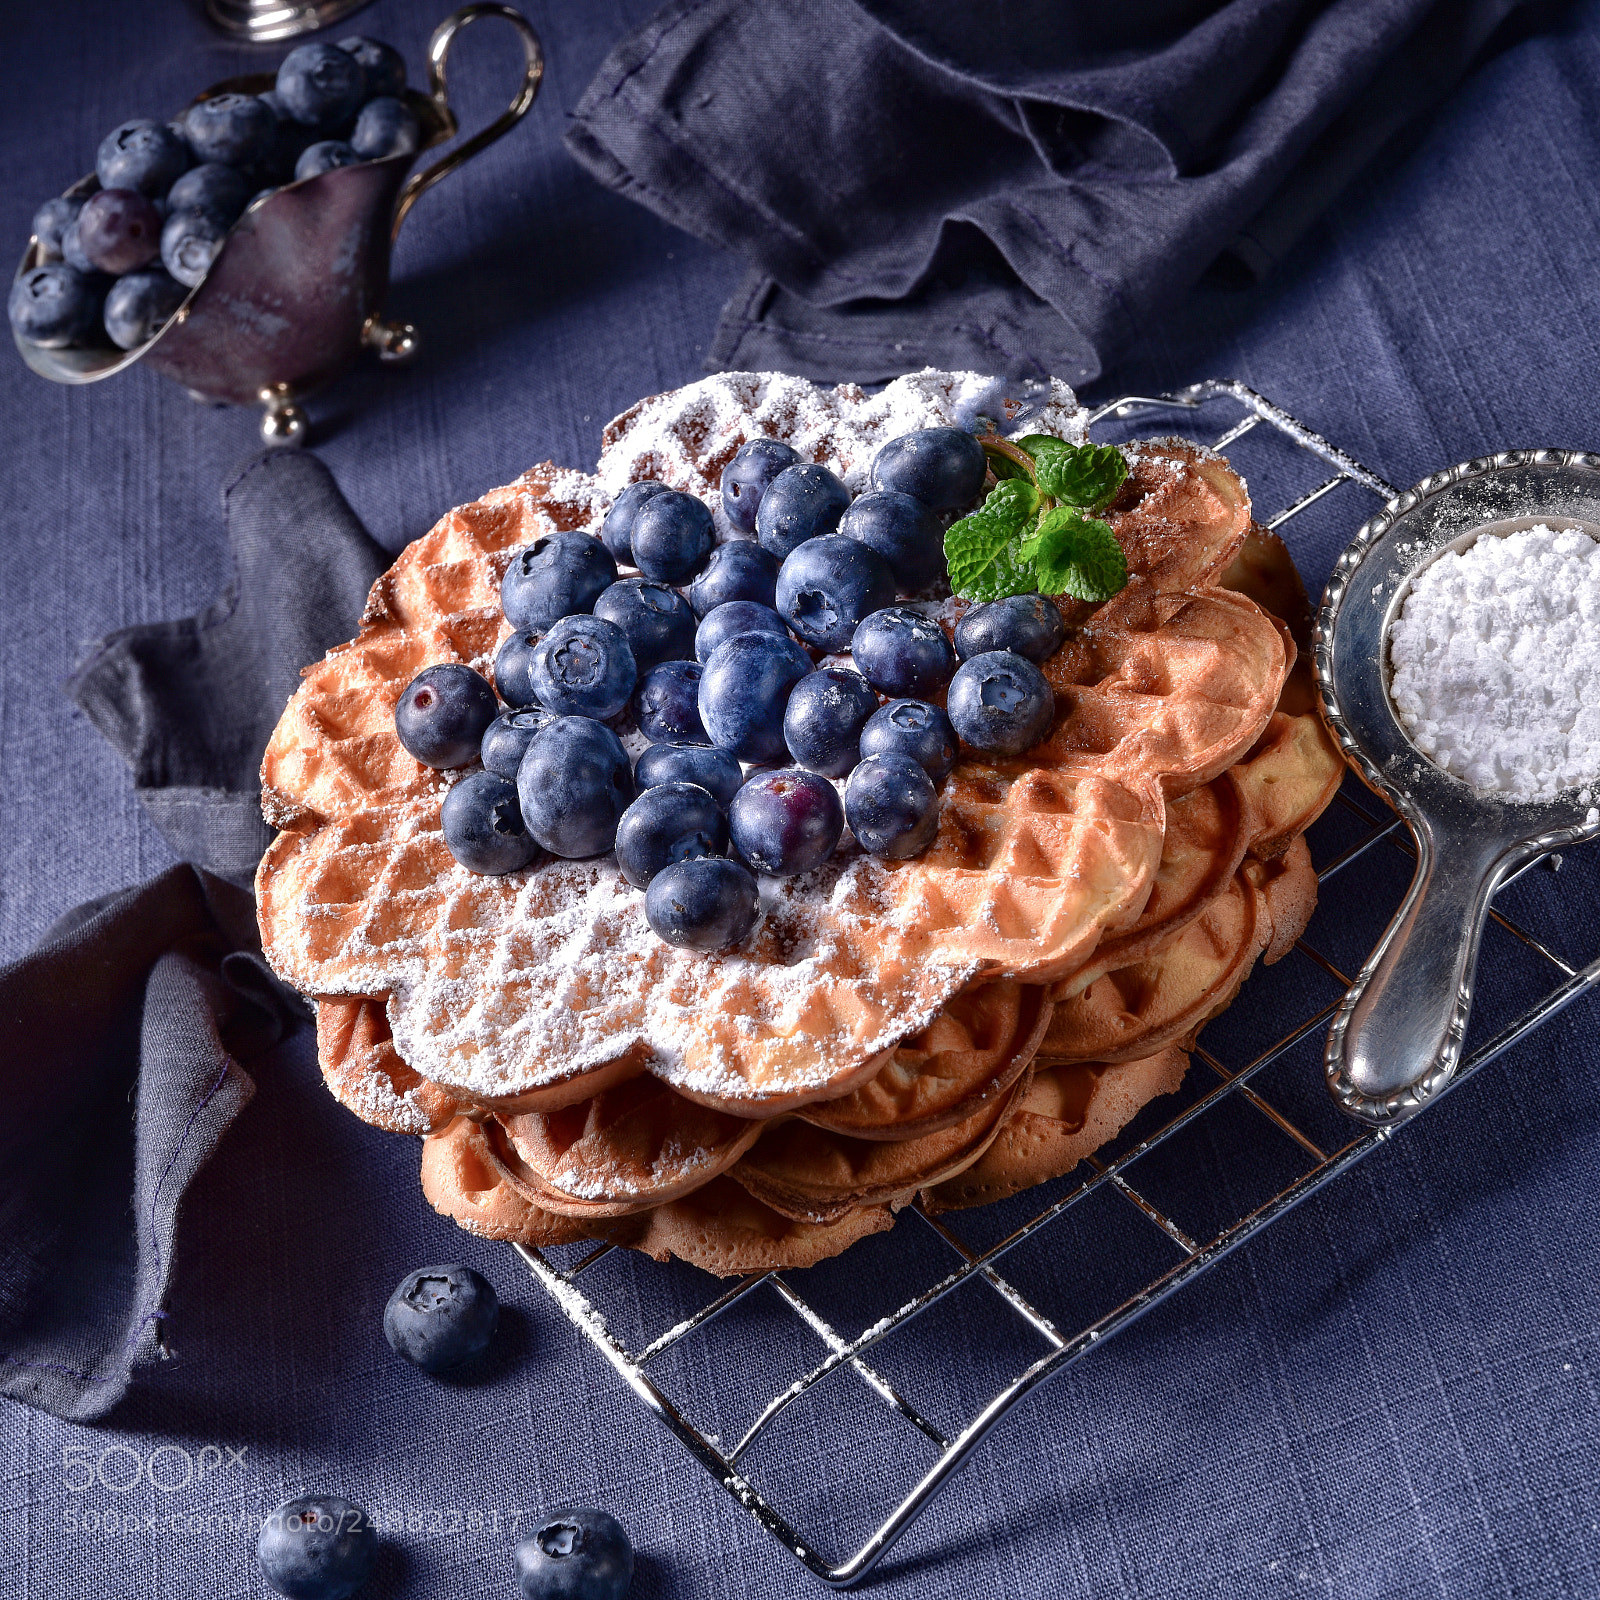 Nikon D810 sample photo. Waffles with blueberries photography